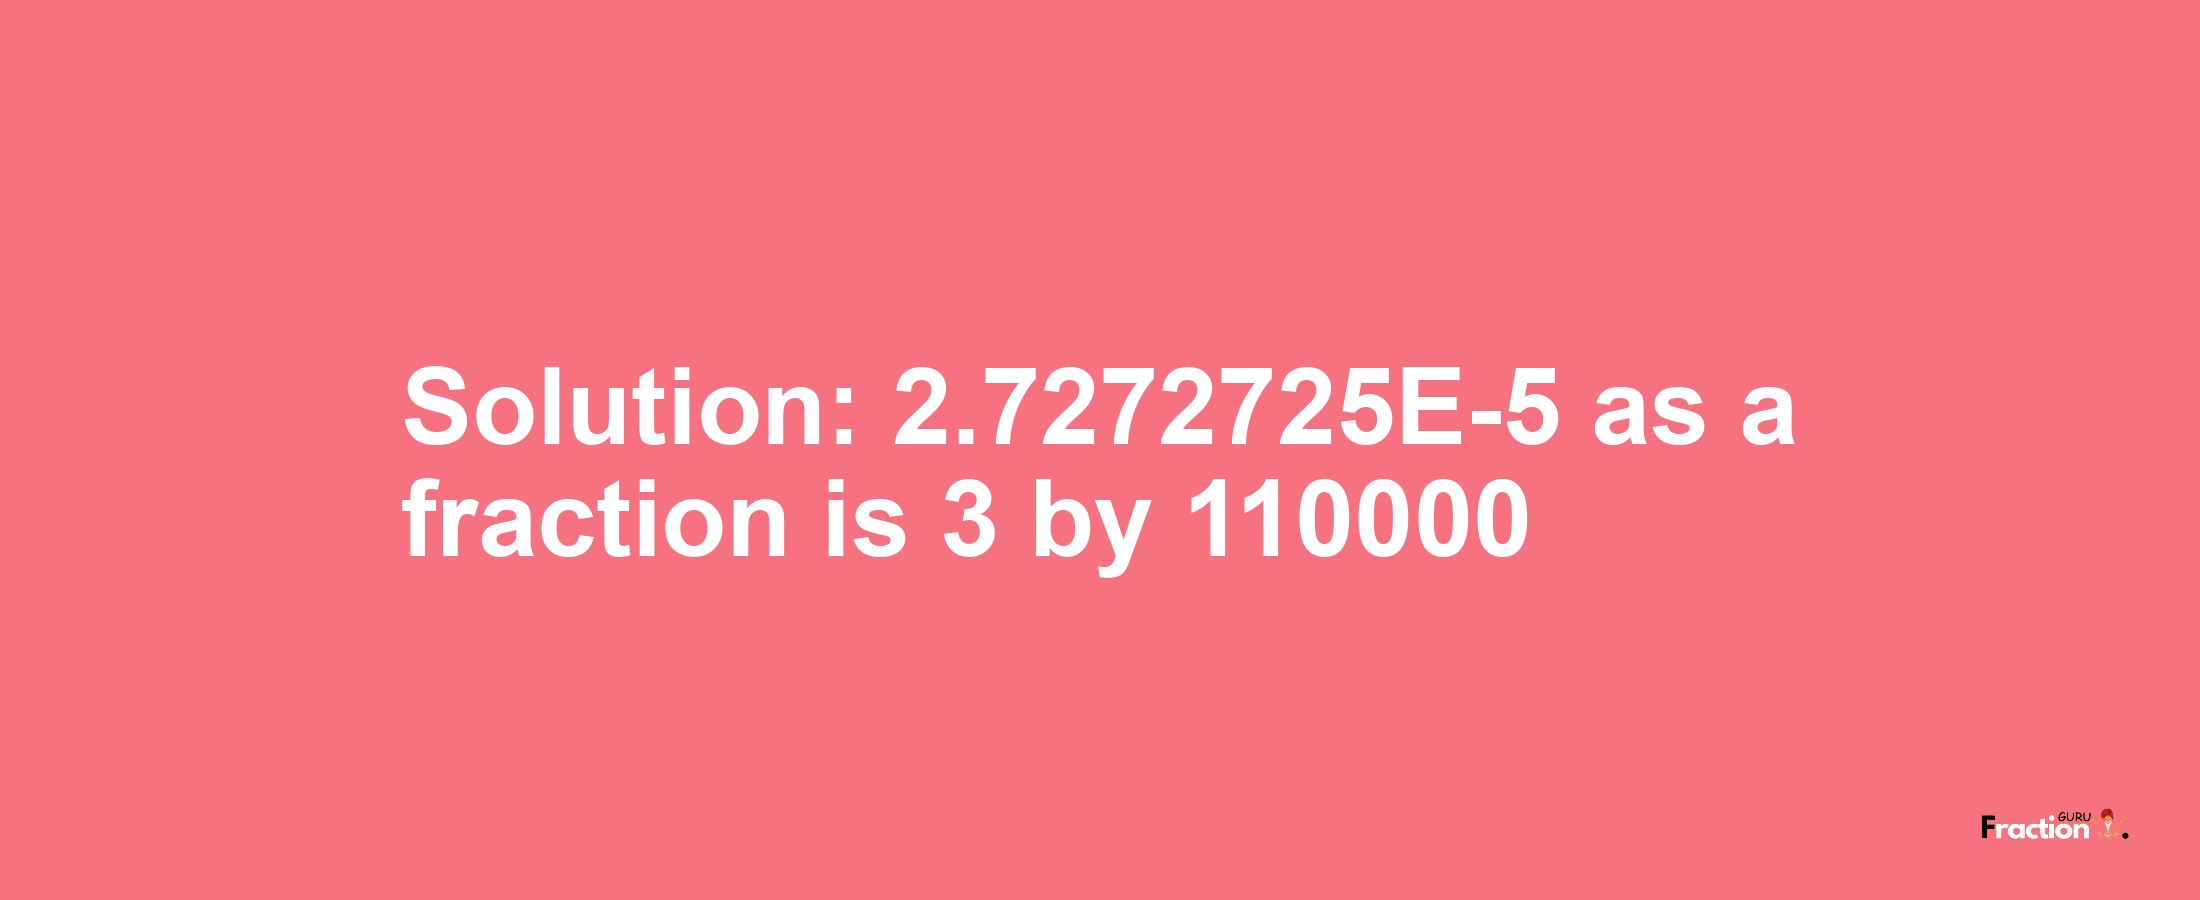 Solution:2.7272725E-5 as a fraction is 3/110000